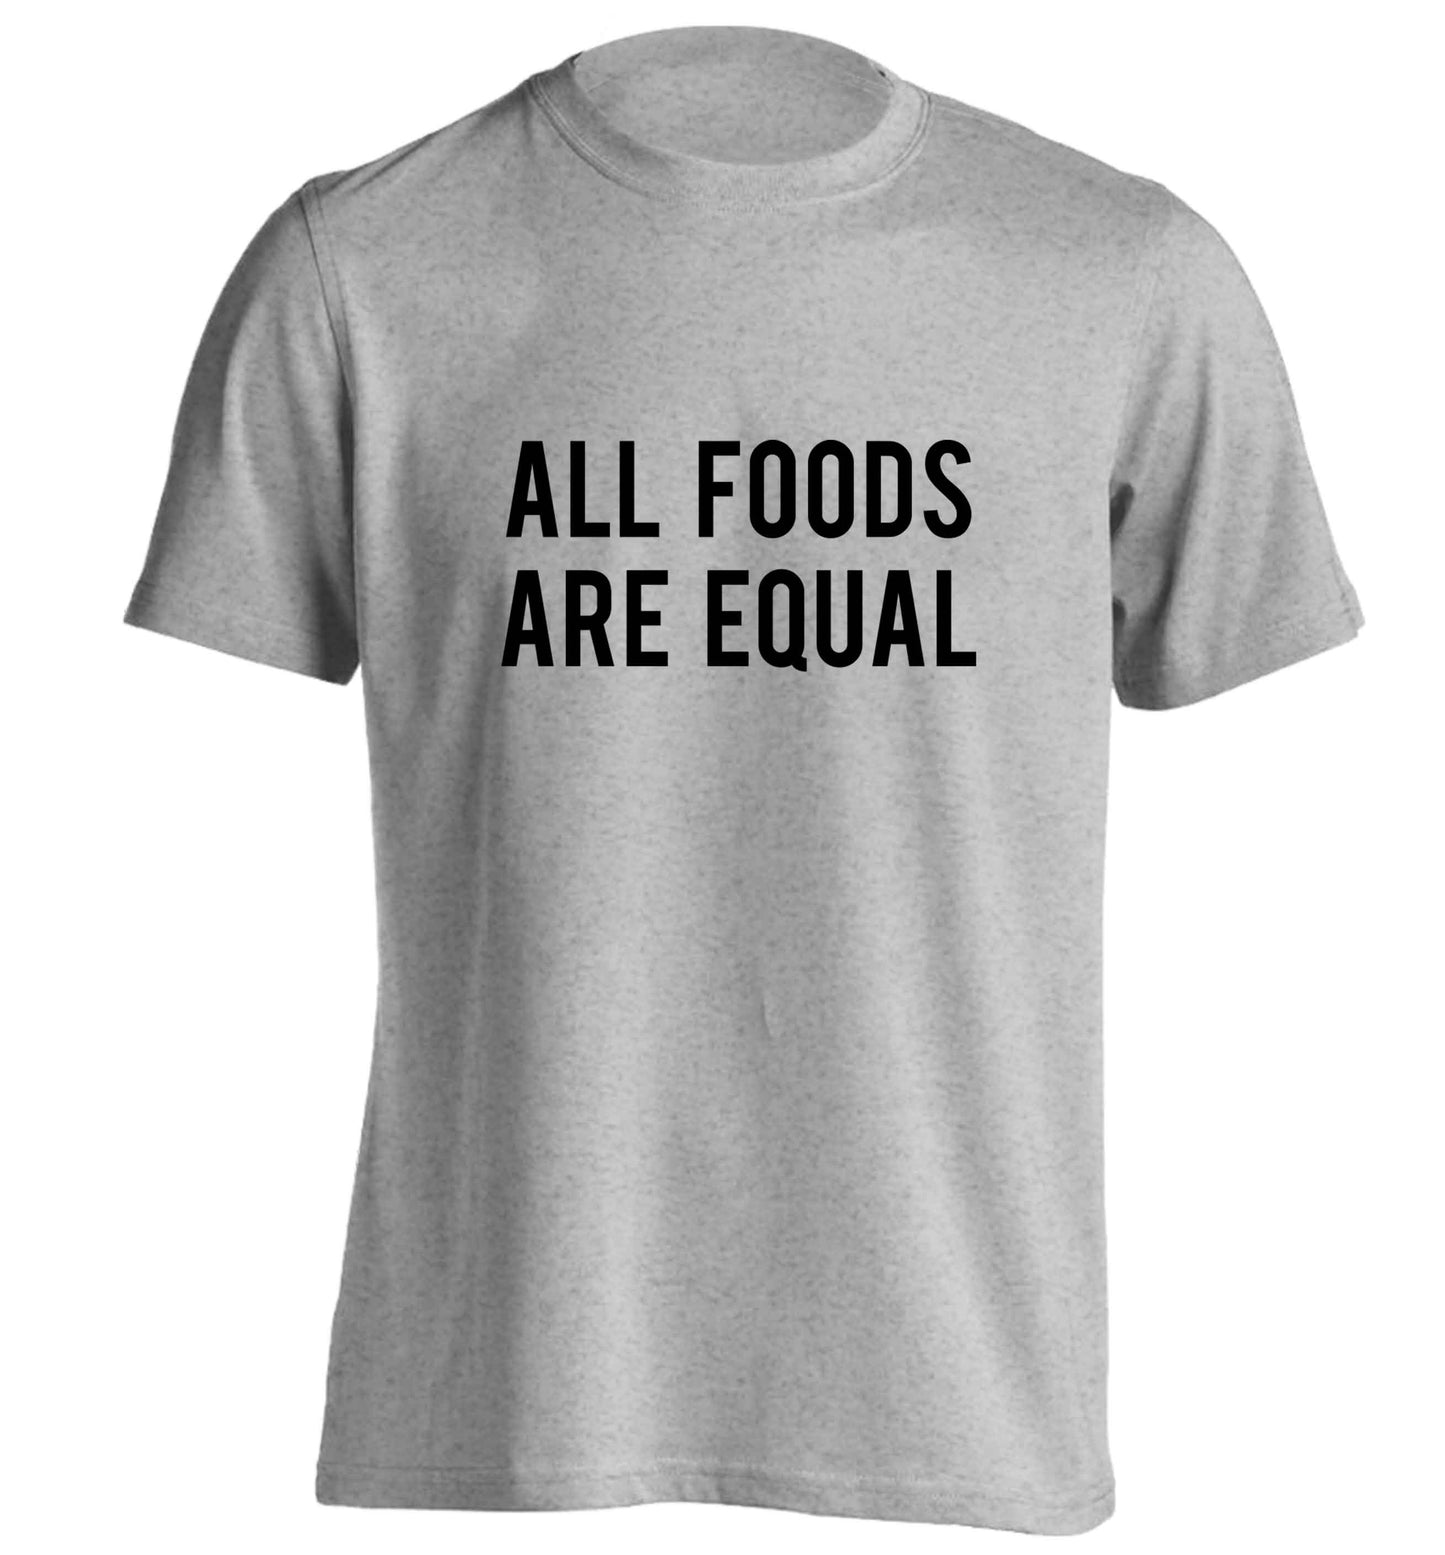 All foods are equal adults unisex grey Tshirt 2XL